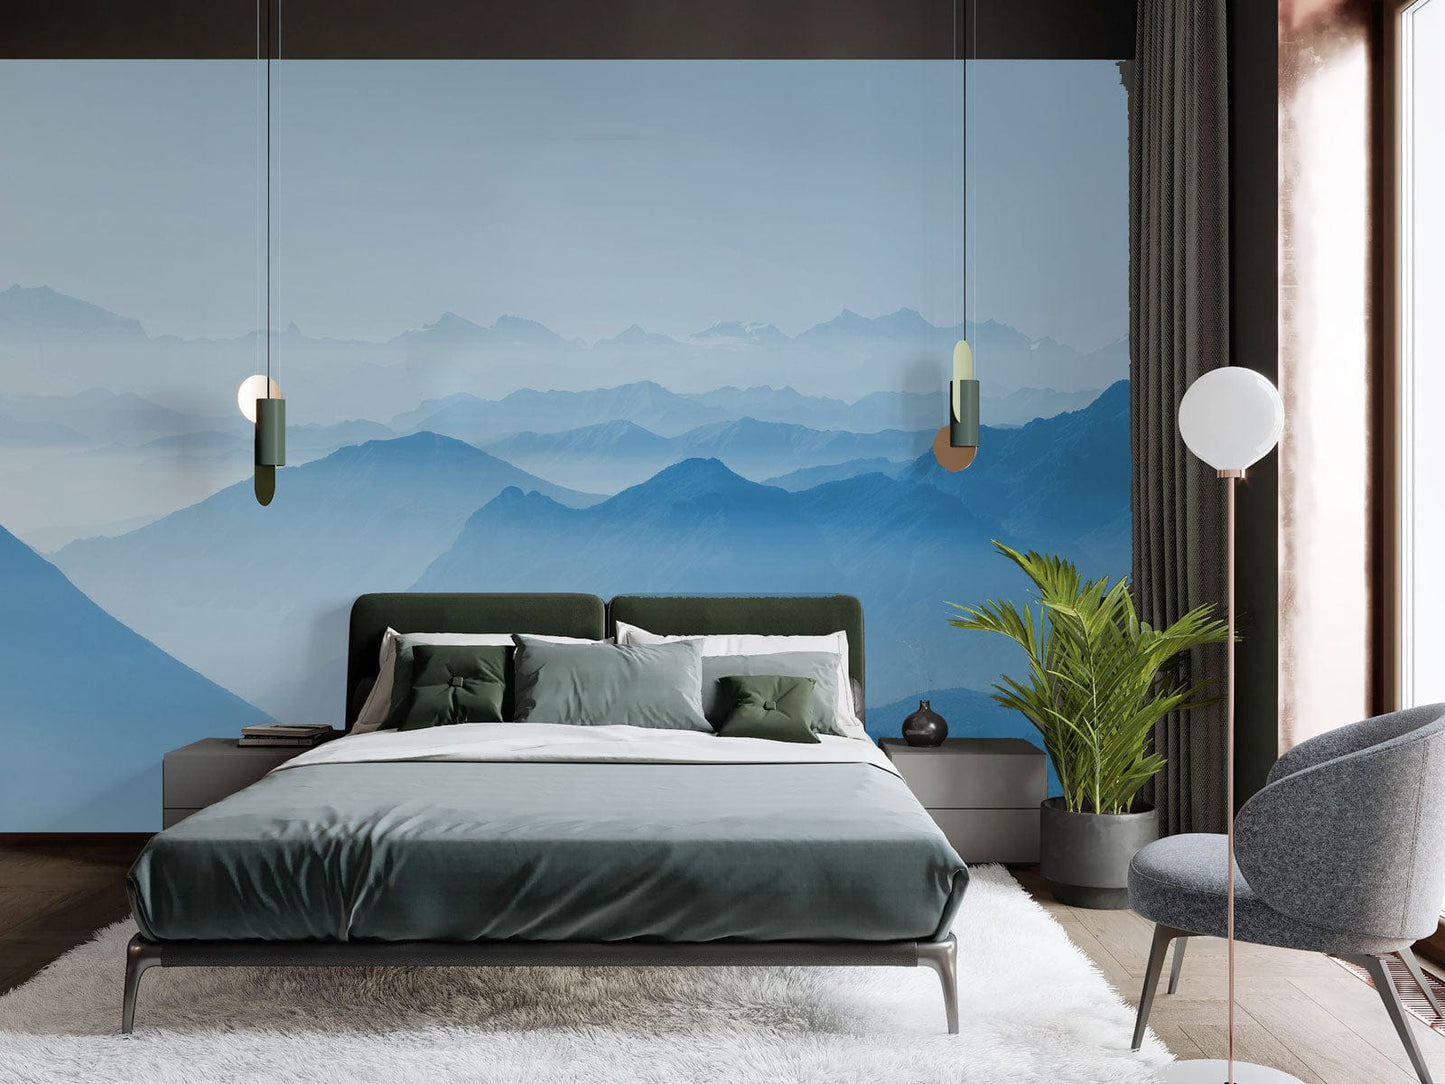 Wallpaper mural for bedroom decoration featuring misty mountains in the distance.